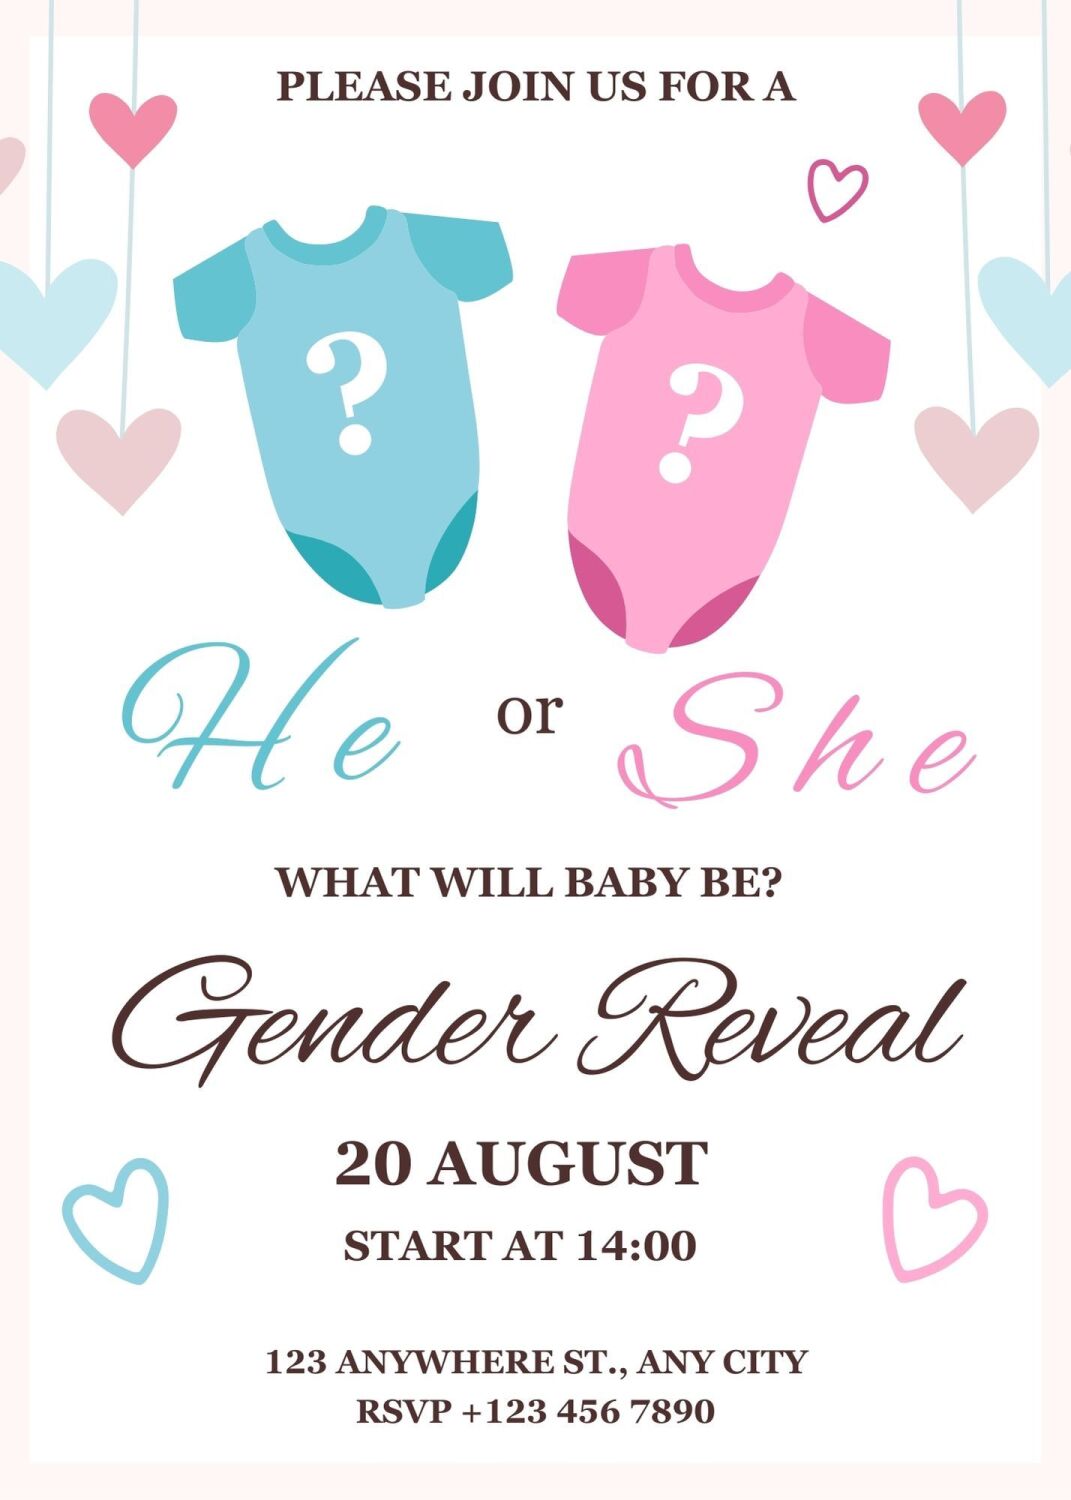 Personalised With Your Details - Customised Gender Reveal Celebration Invit